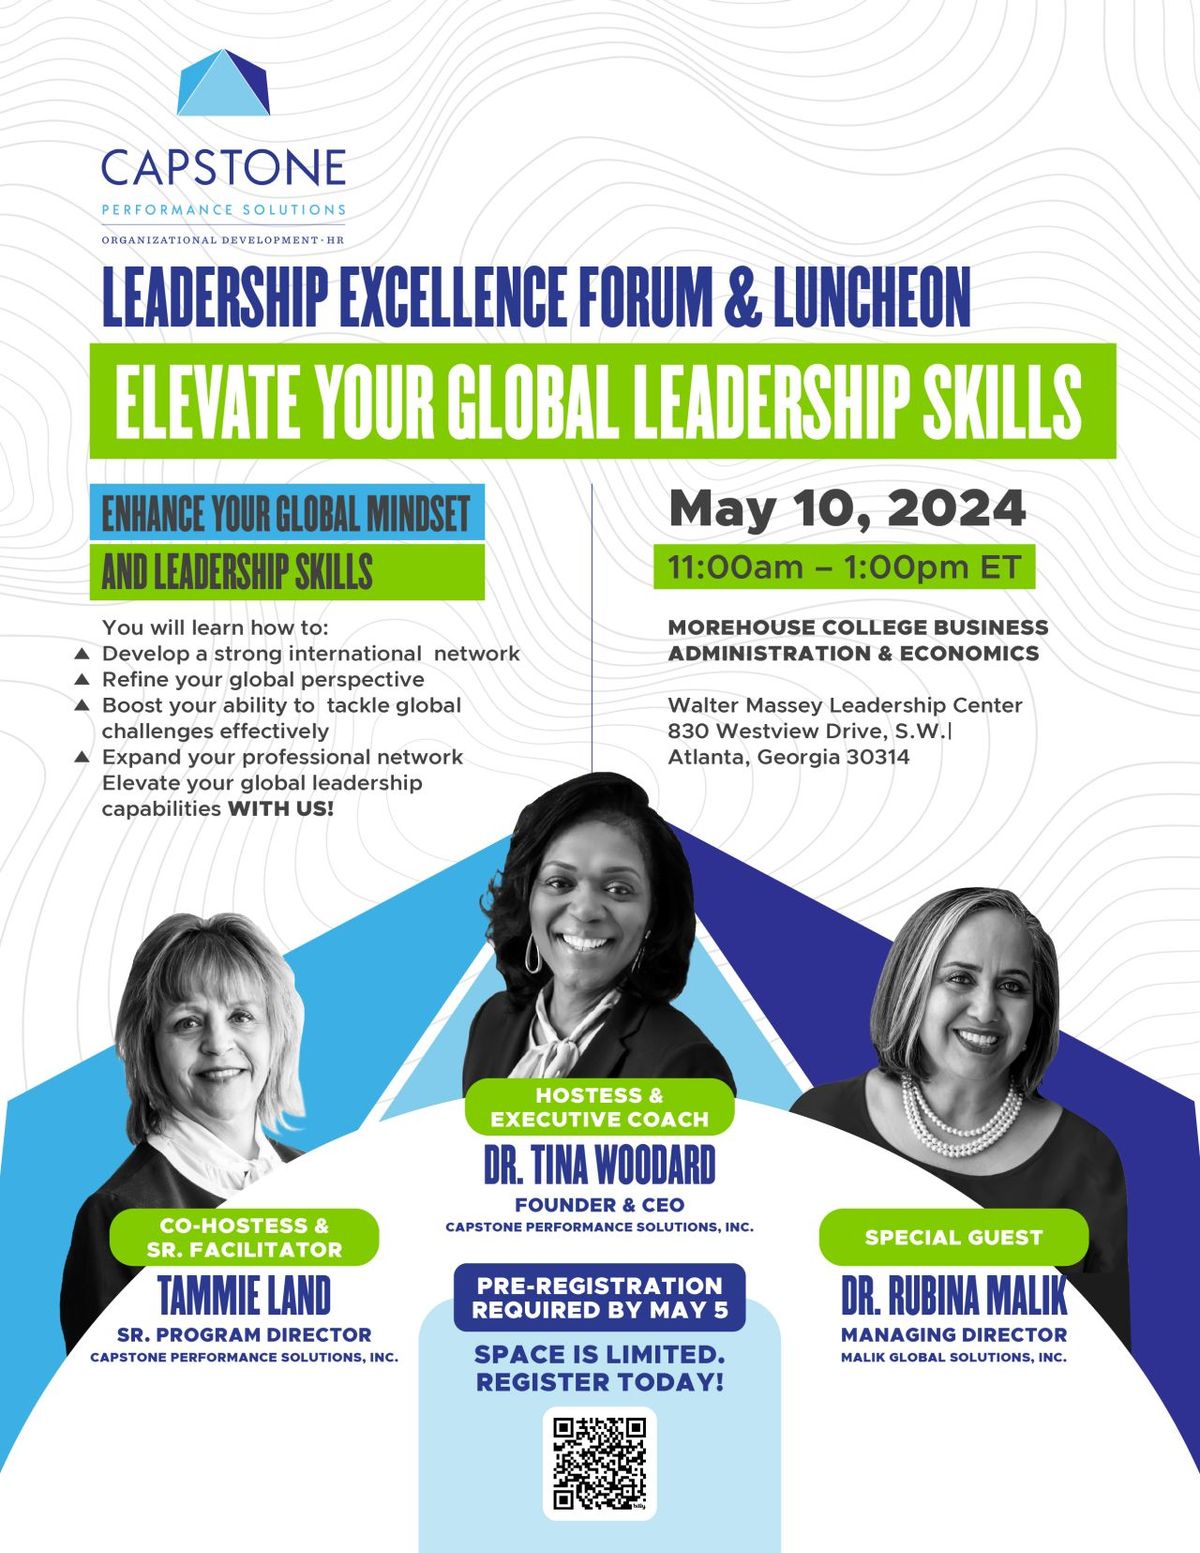 Leadership Excellence Forum & Luncheon